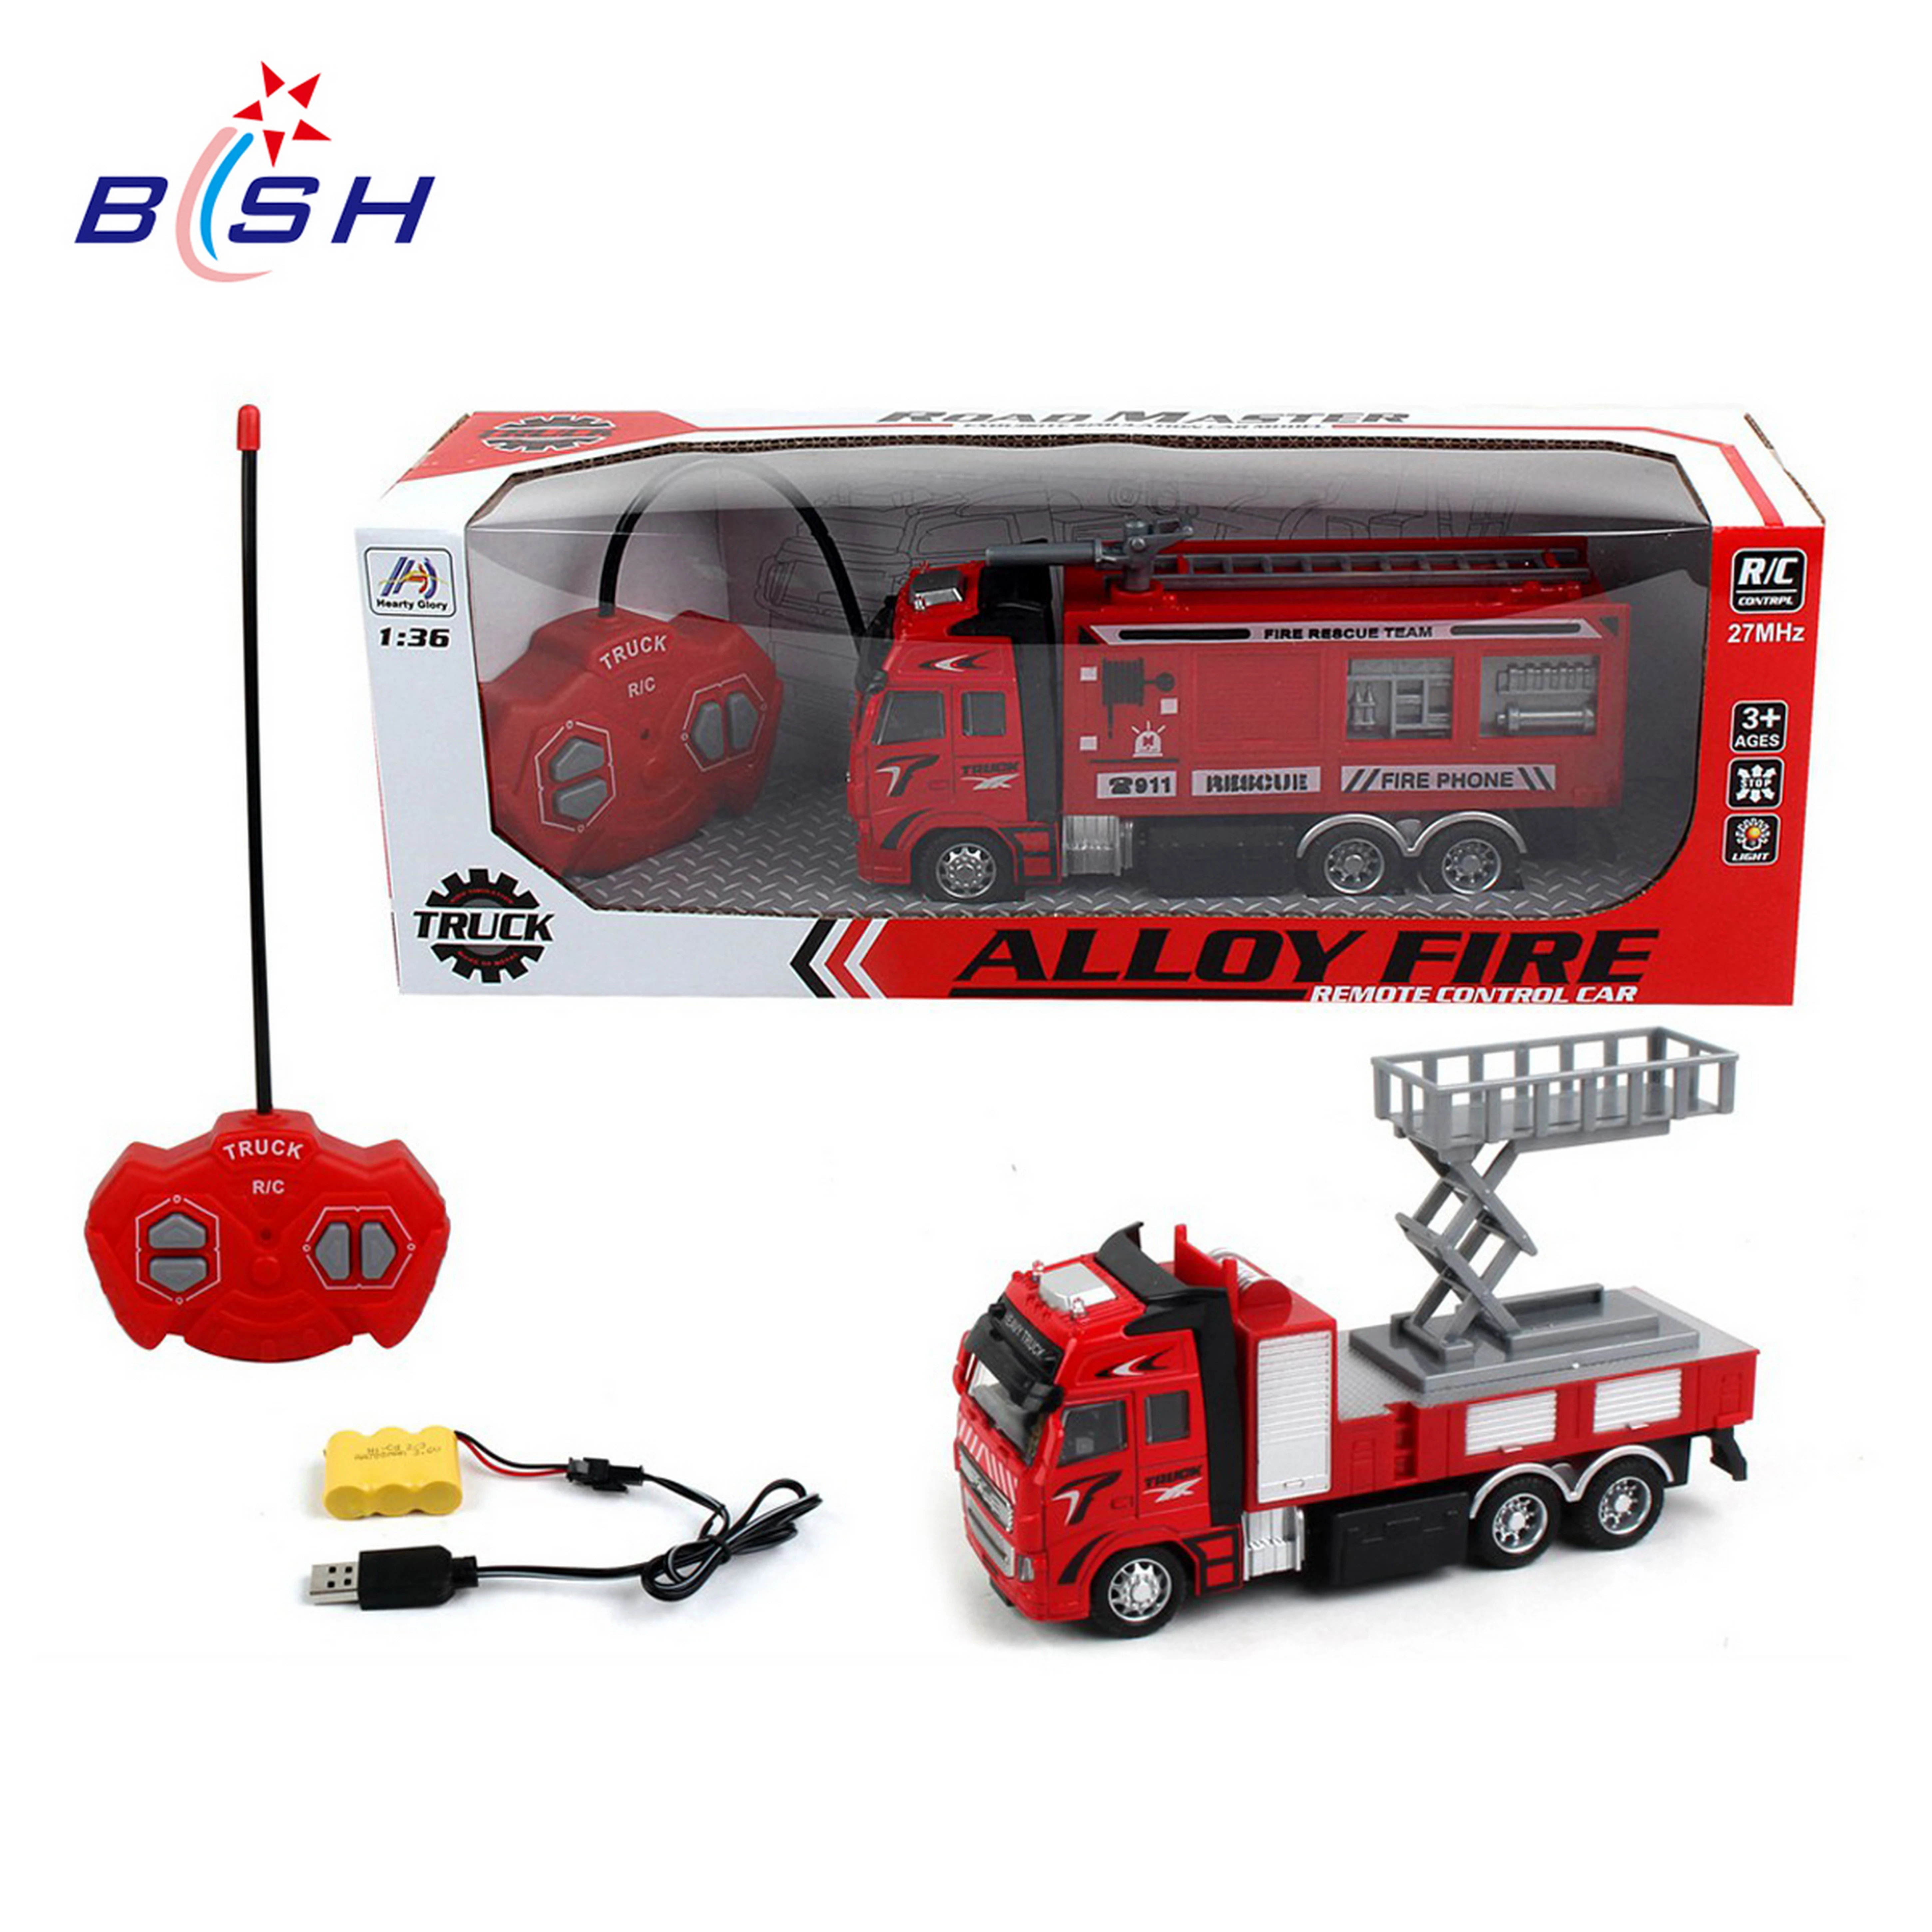 1:36 4 channel alloy rc fire trucks remote control car toy with light